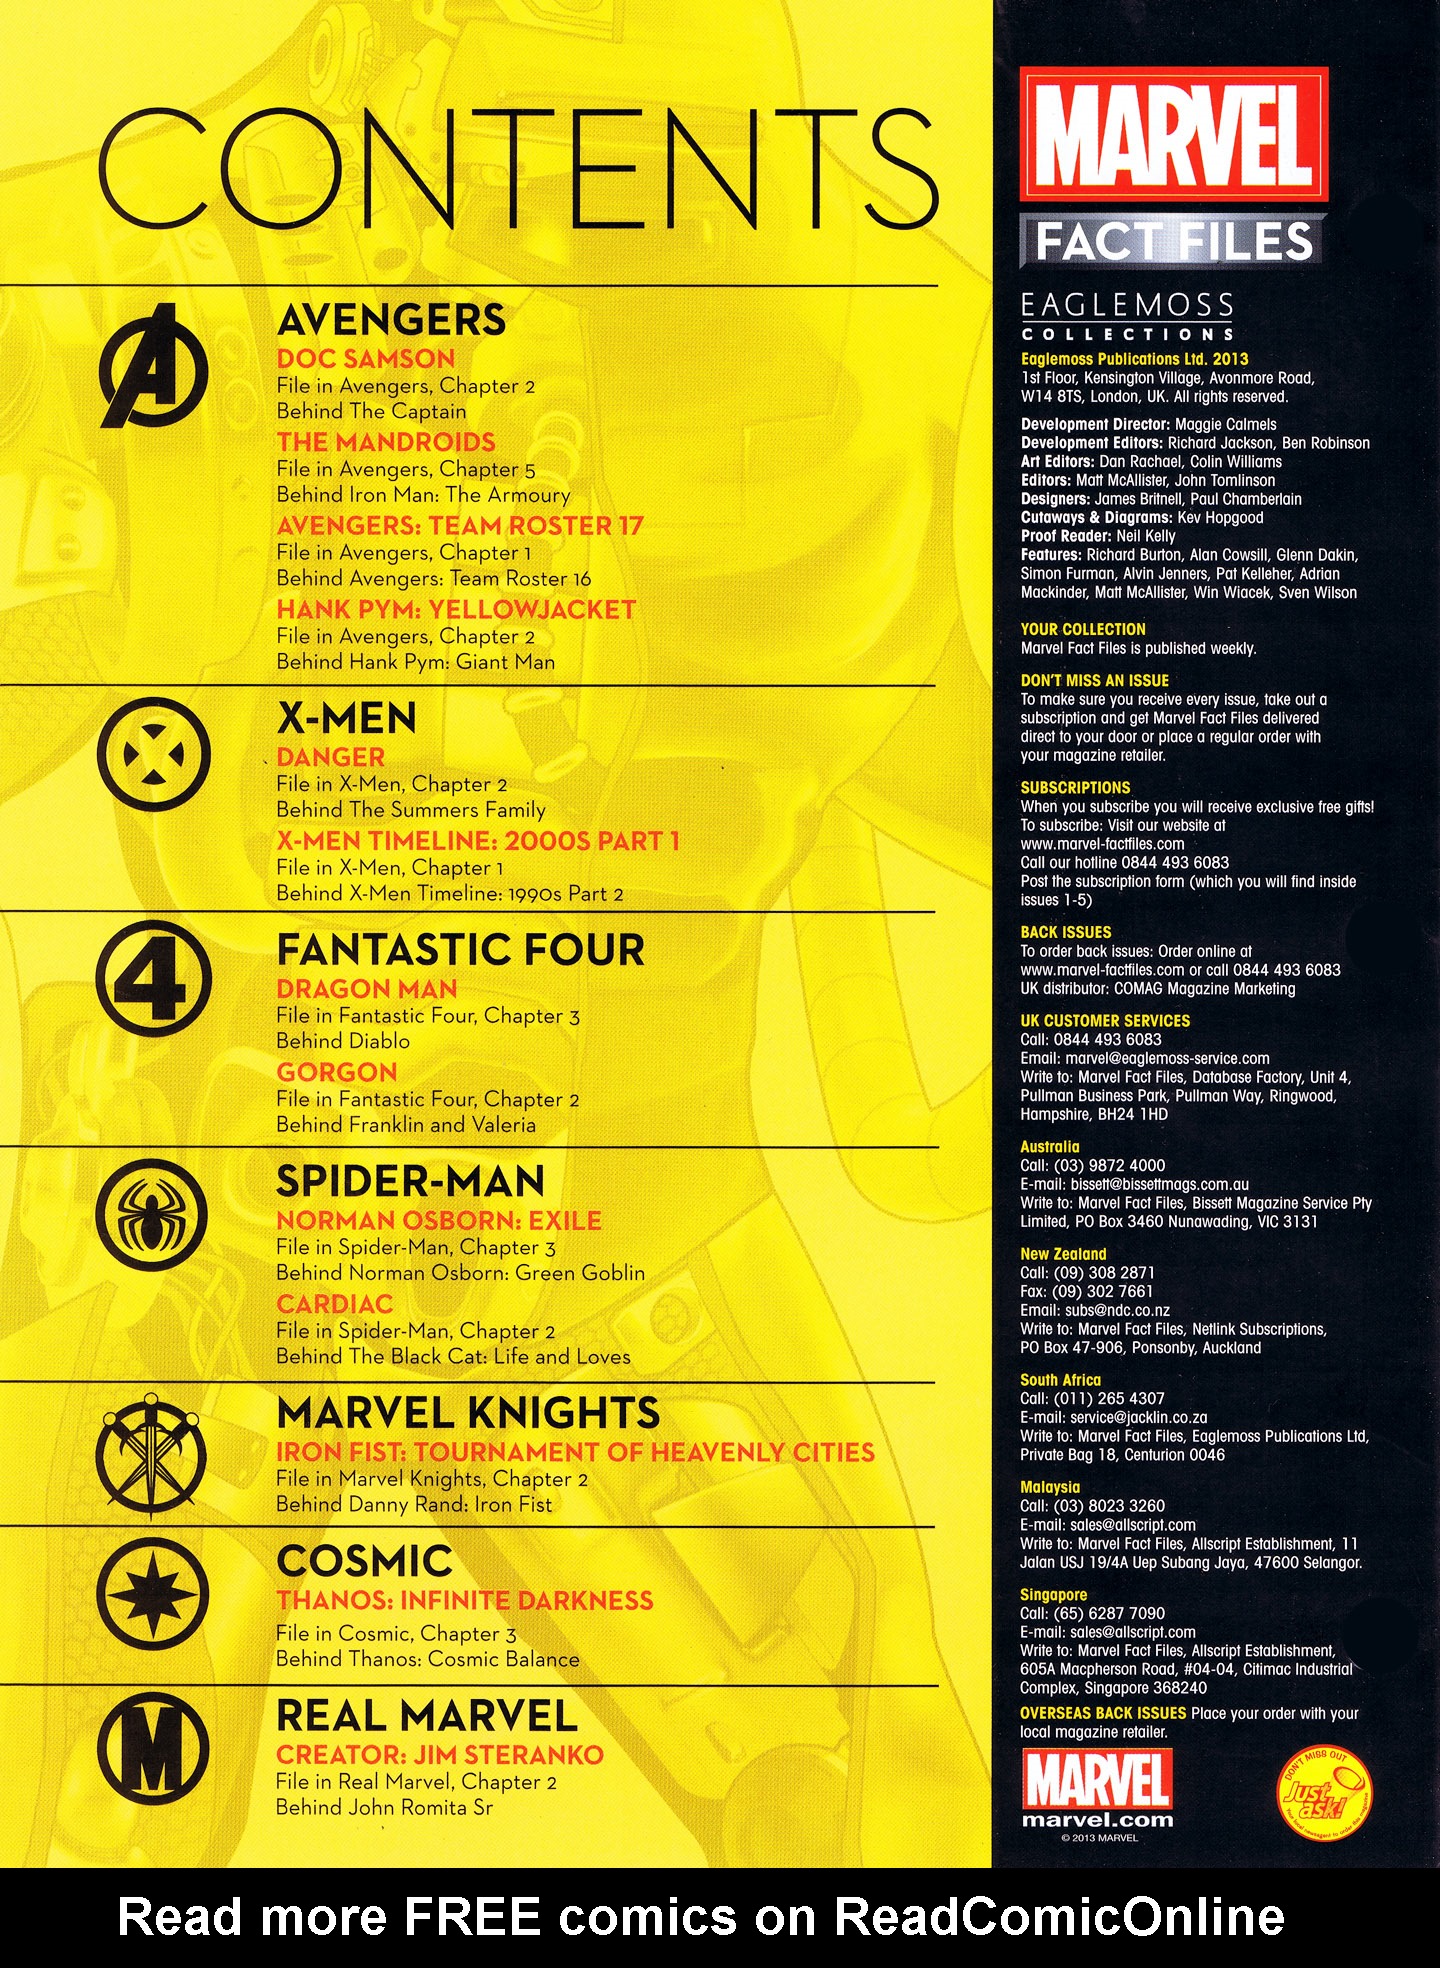 Read online Marvel Fact Files comic -  Issue #44 - 3